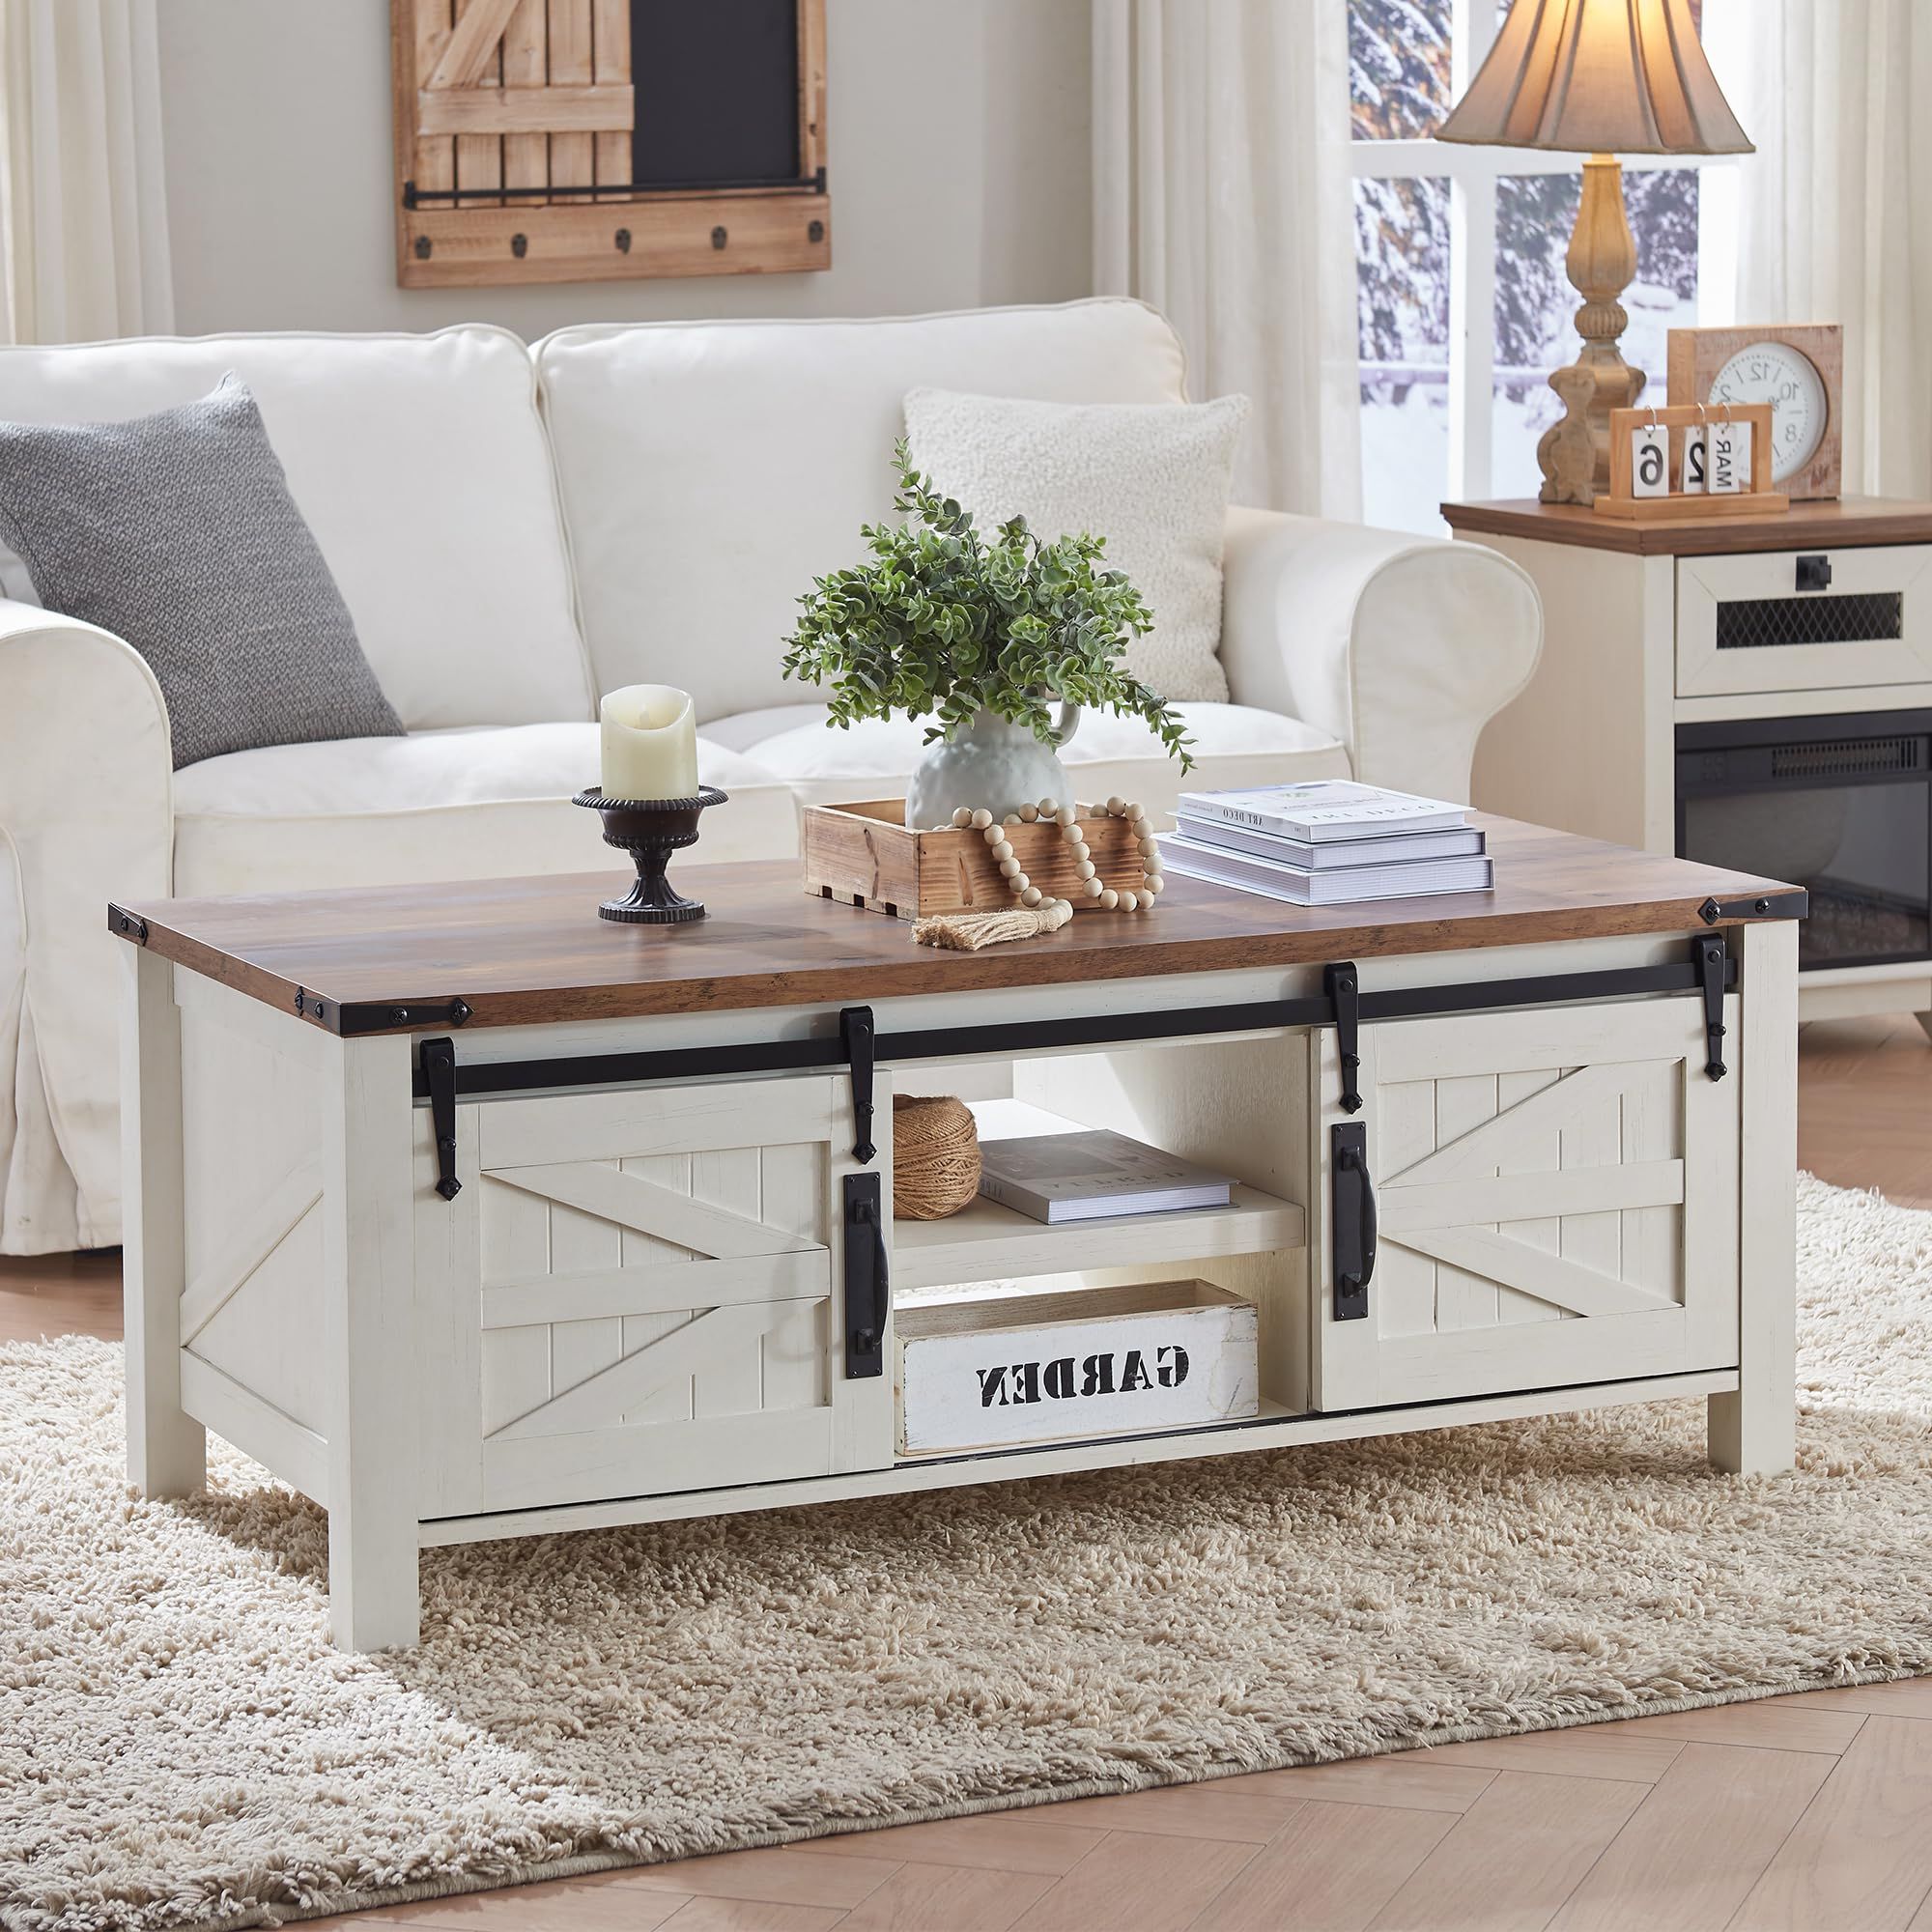 2019 Coffee Tables With Sliding Barn Doors Pertaining To Amazon: Okd Farmhouse Coffee Table, 48" Storage Center Table With Sliding  Barn Doors, Rustic Wood Rectangular Cocktail Table With W/adjustable  Shelves For Living Room, Antique White : Home & Kitchen (Photo 2 of 10)